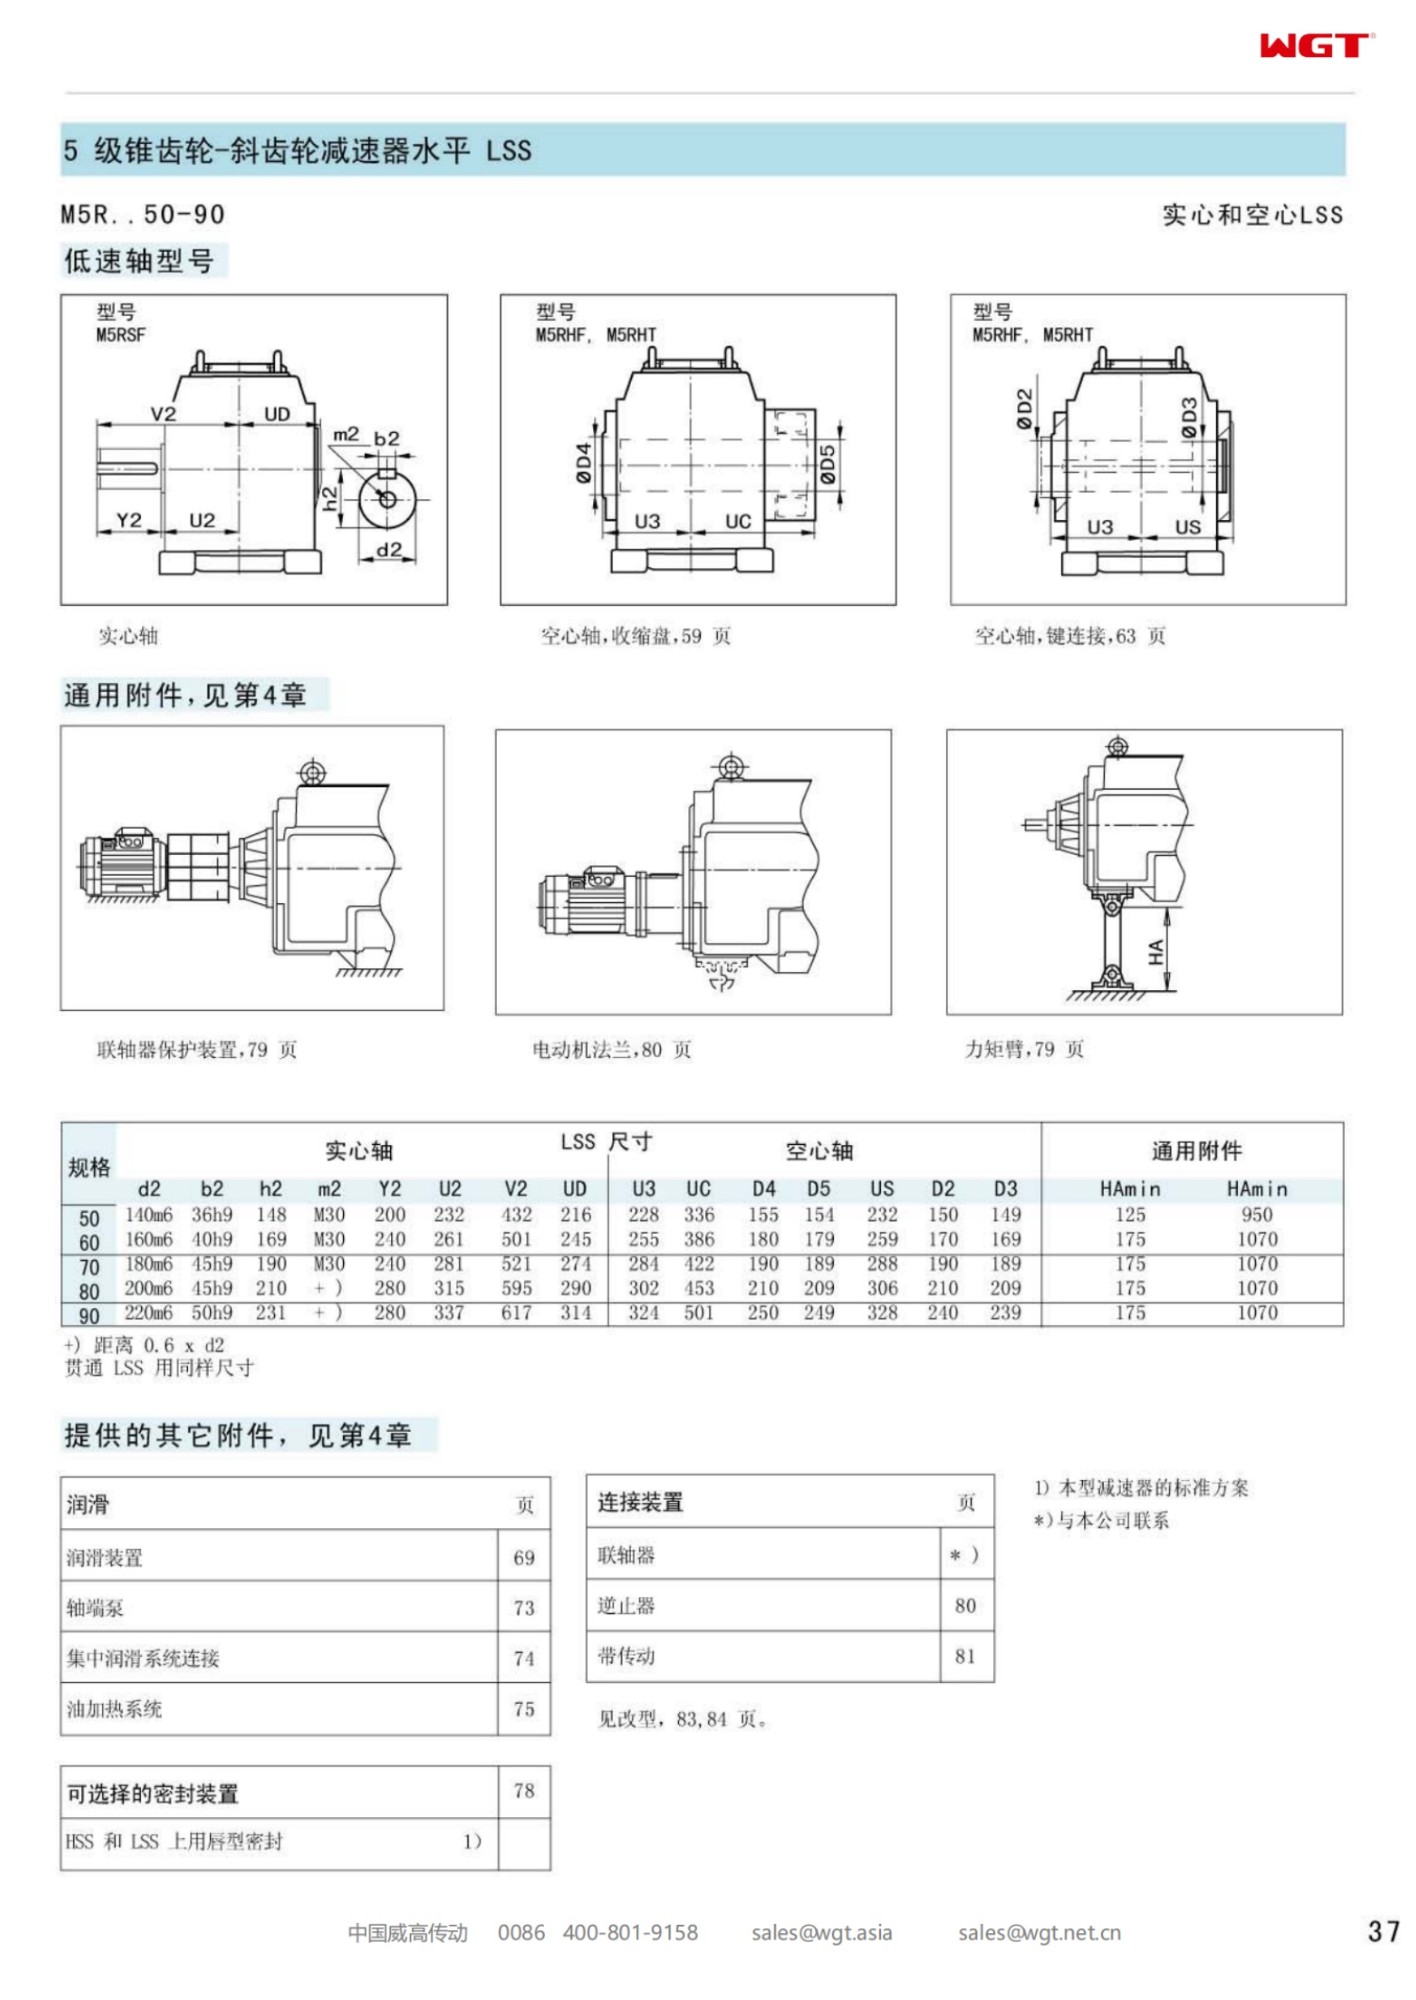 M5RHT70 Replace_SEW_M_Series Gearbox 